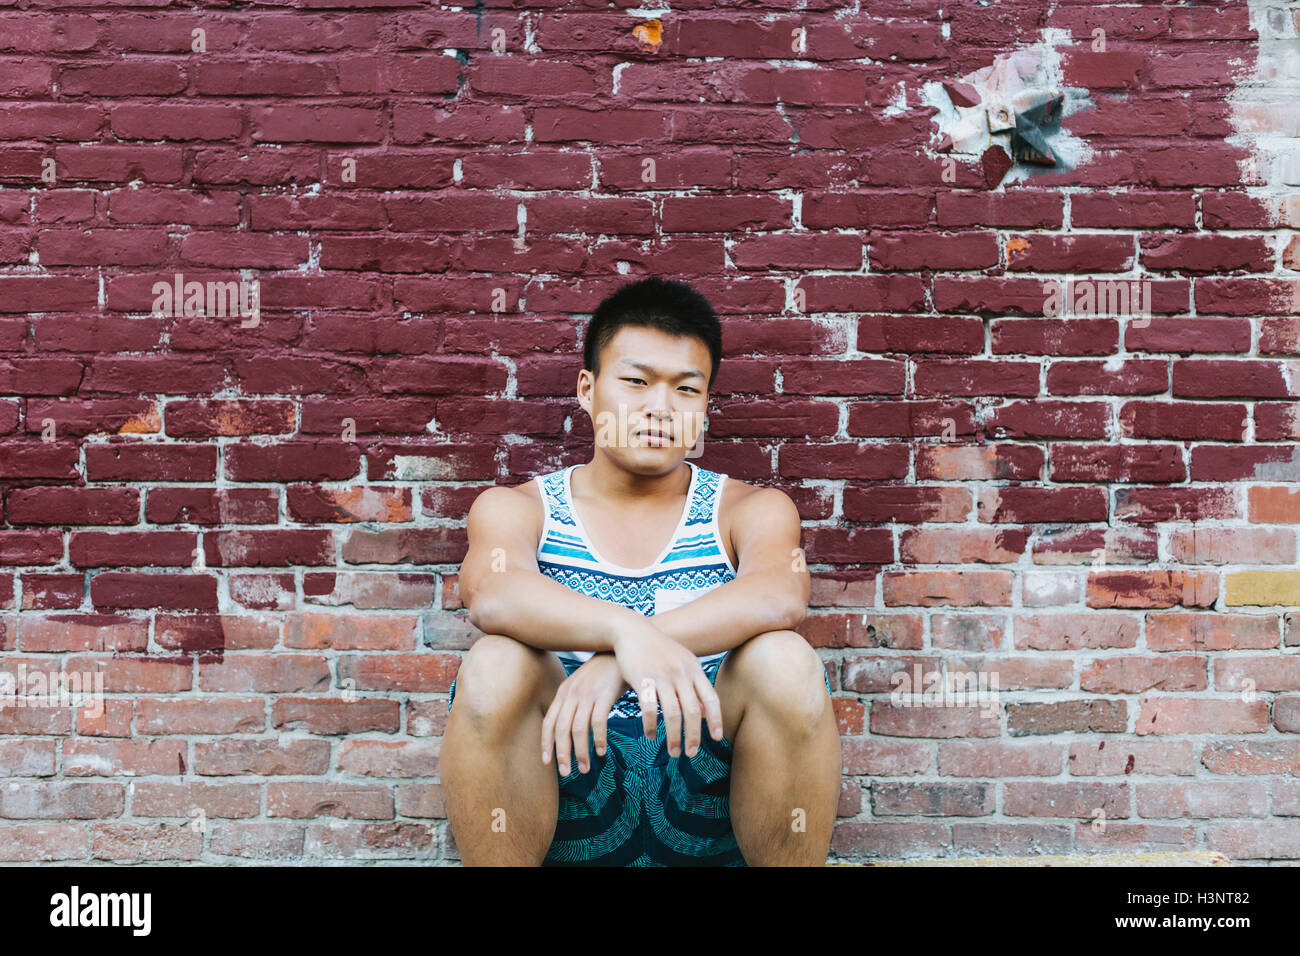 Man squatting in front of brick wall Stock Photo